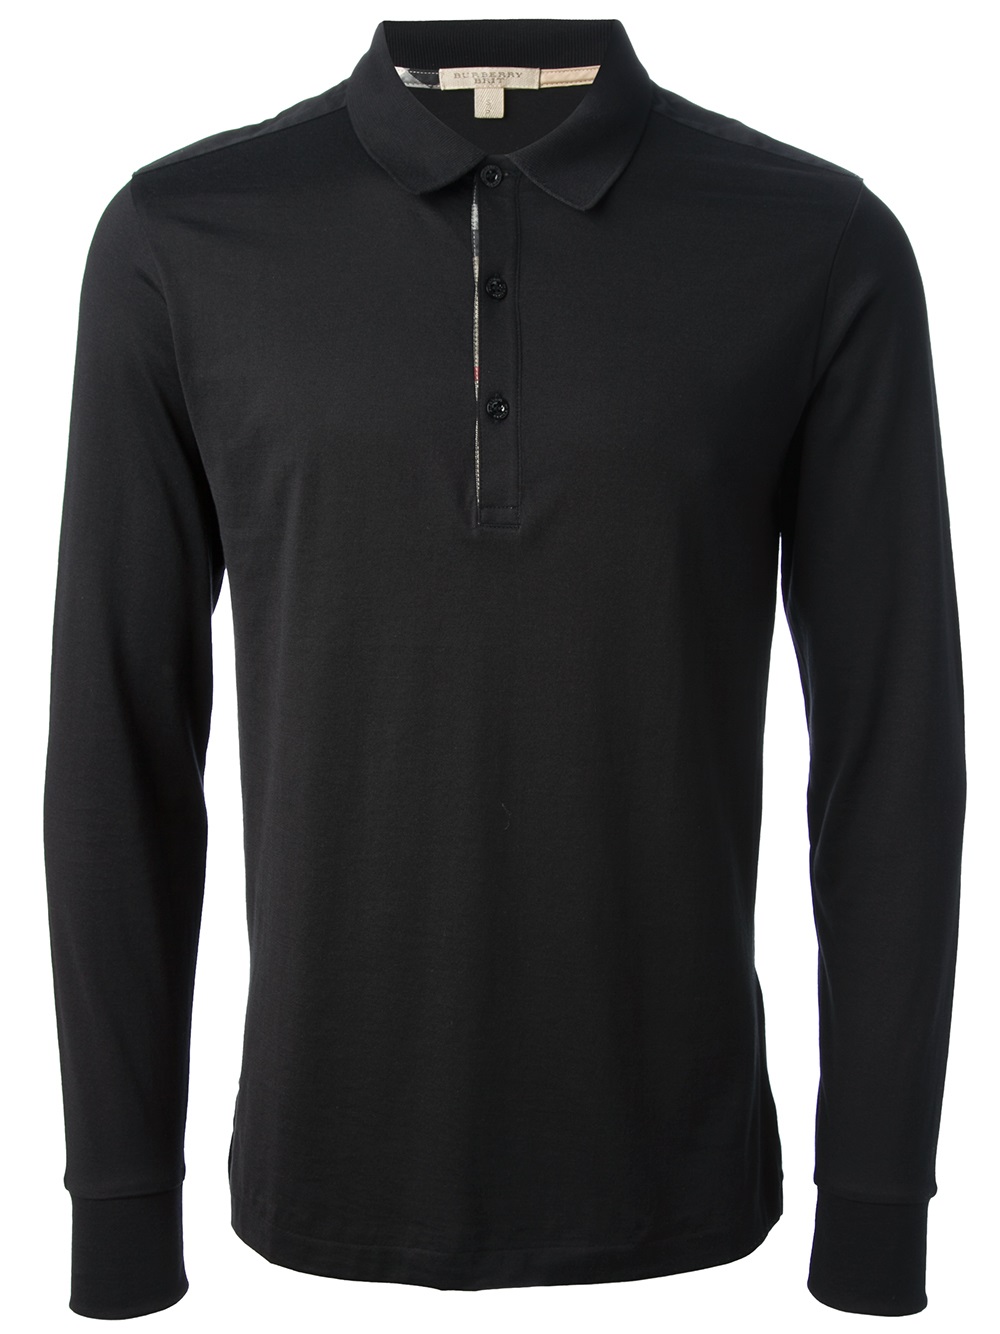 Burberry Brit Long Sleeve Polo Shirt in Black for Men - Lyst